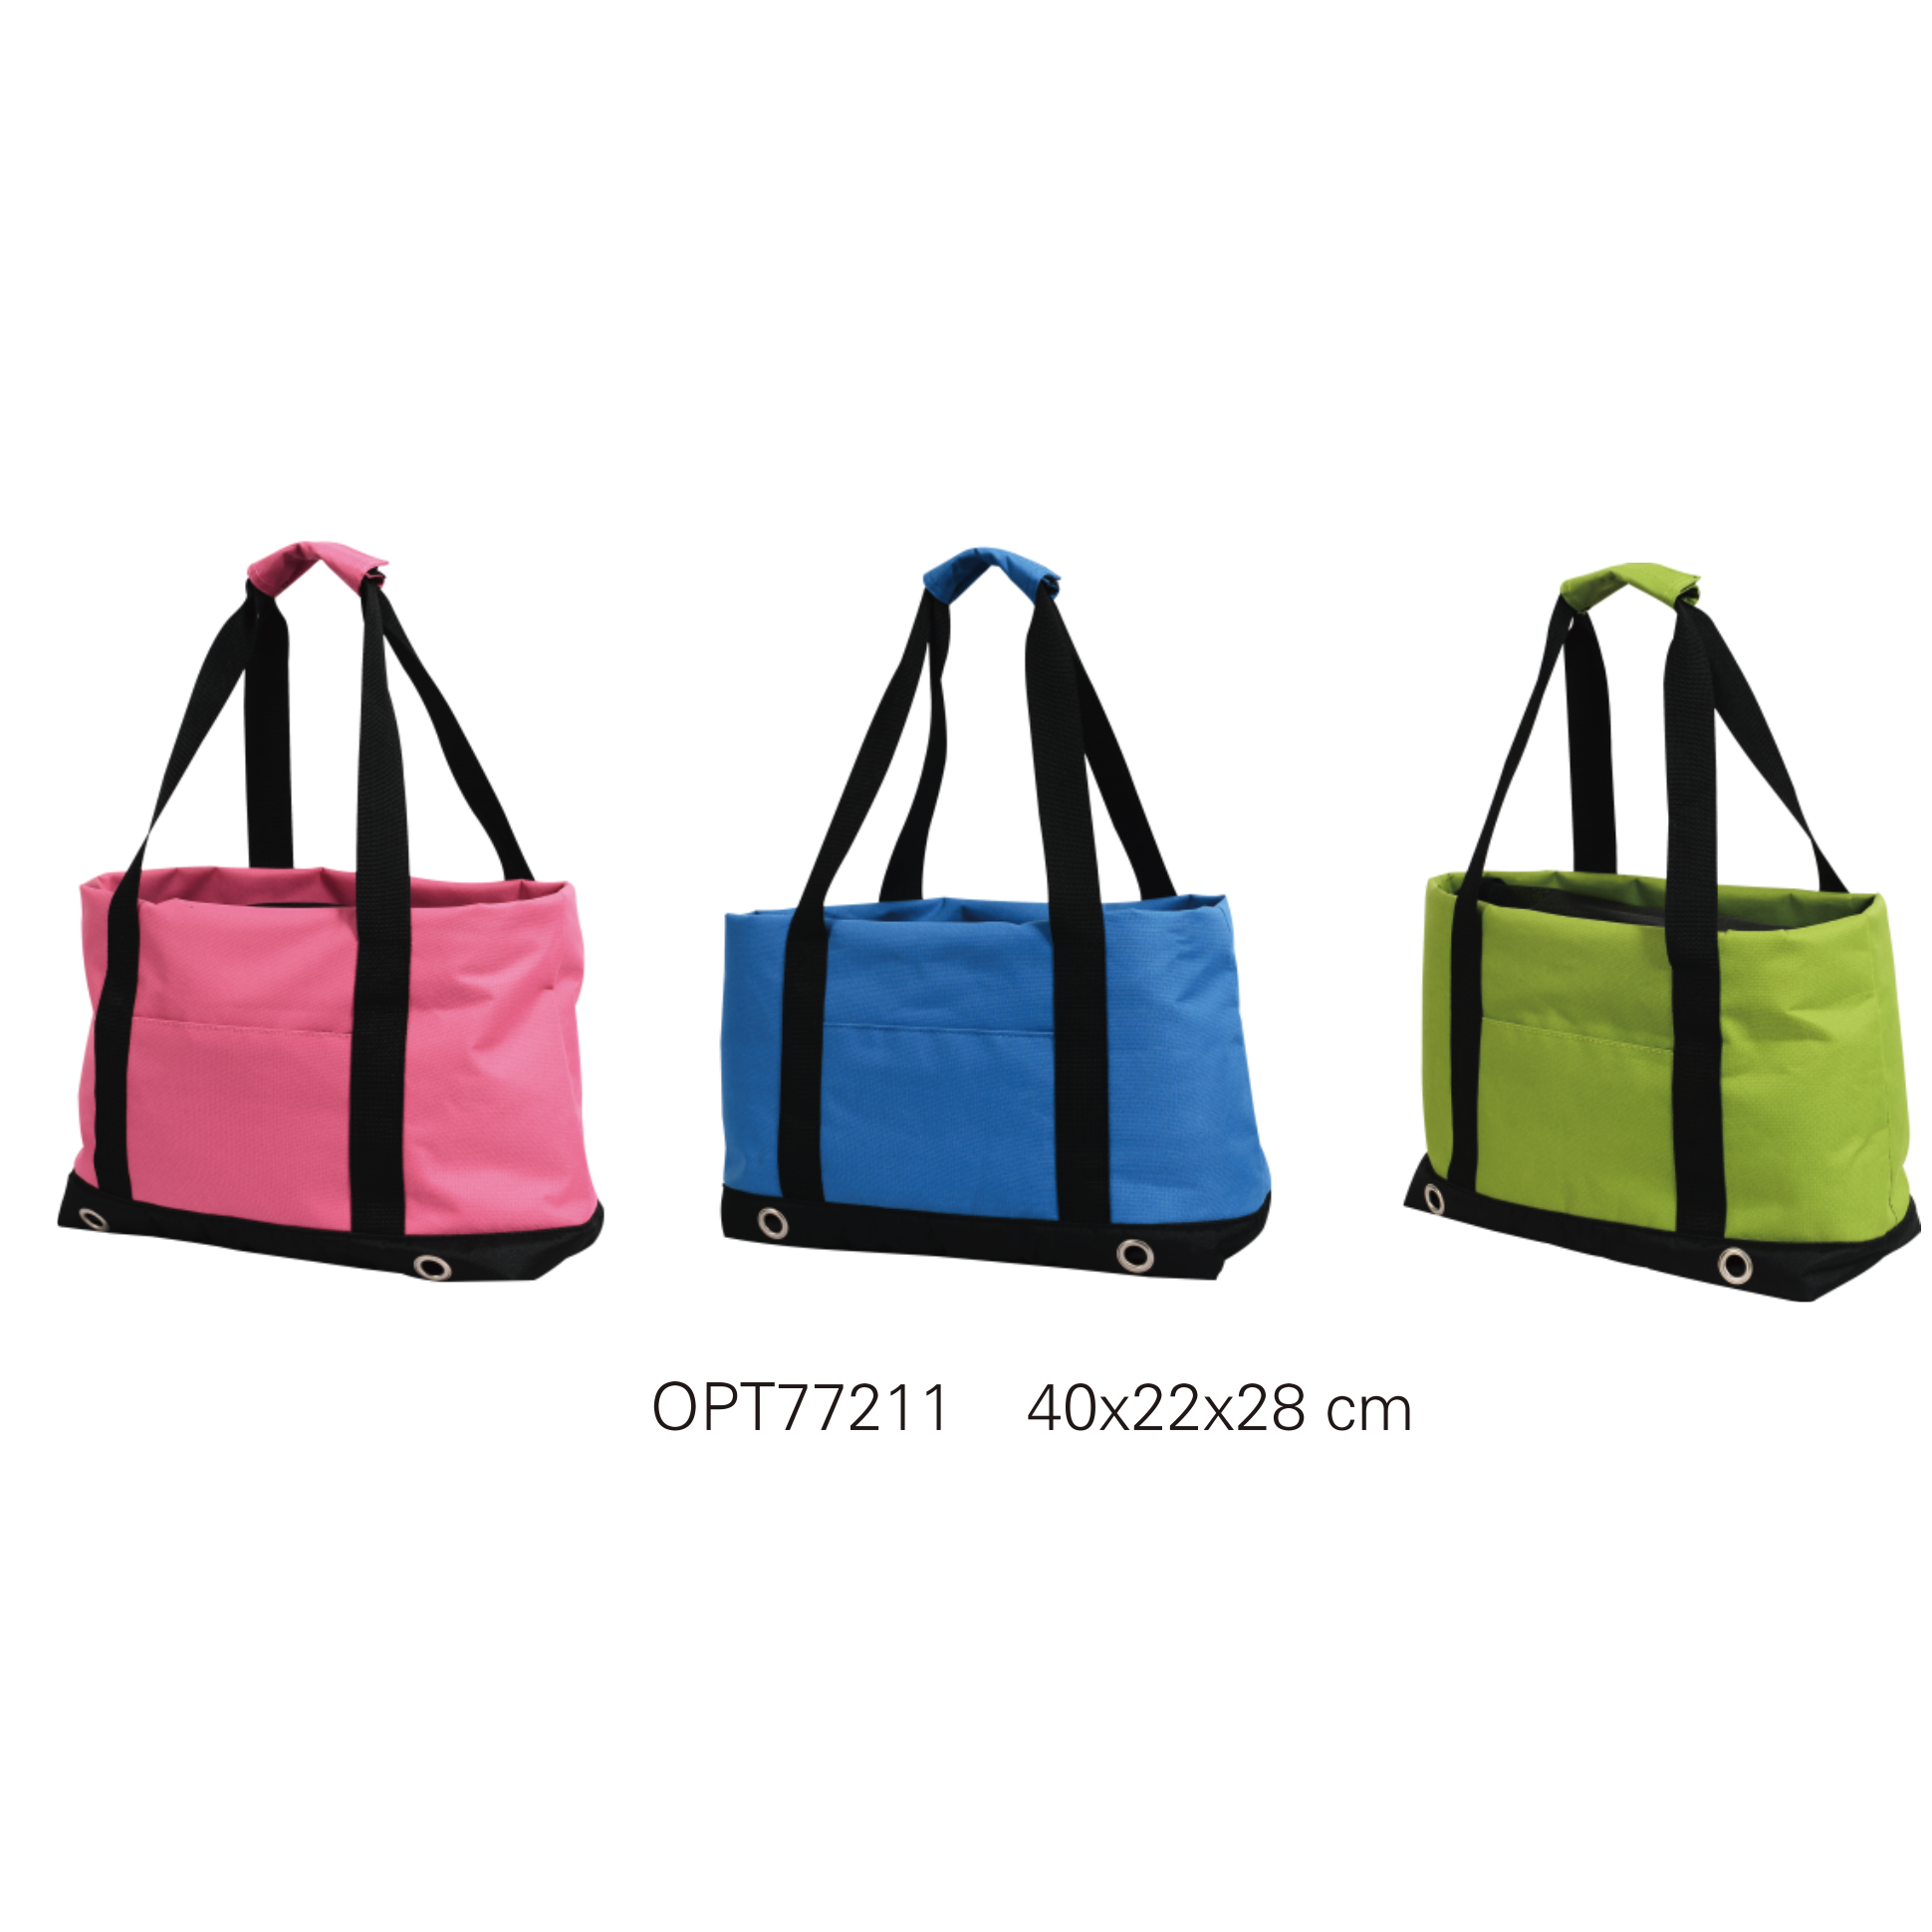 OPT77211 Pet bags & carriers